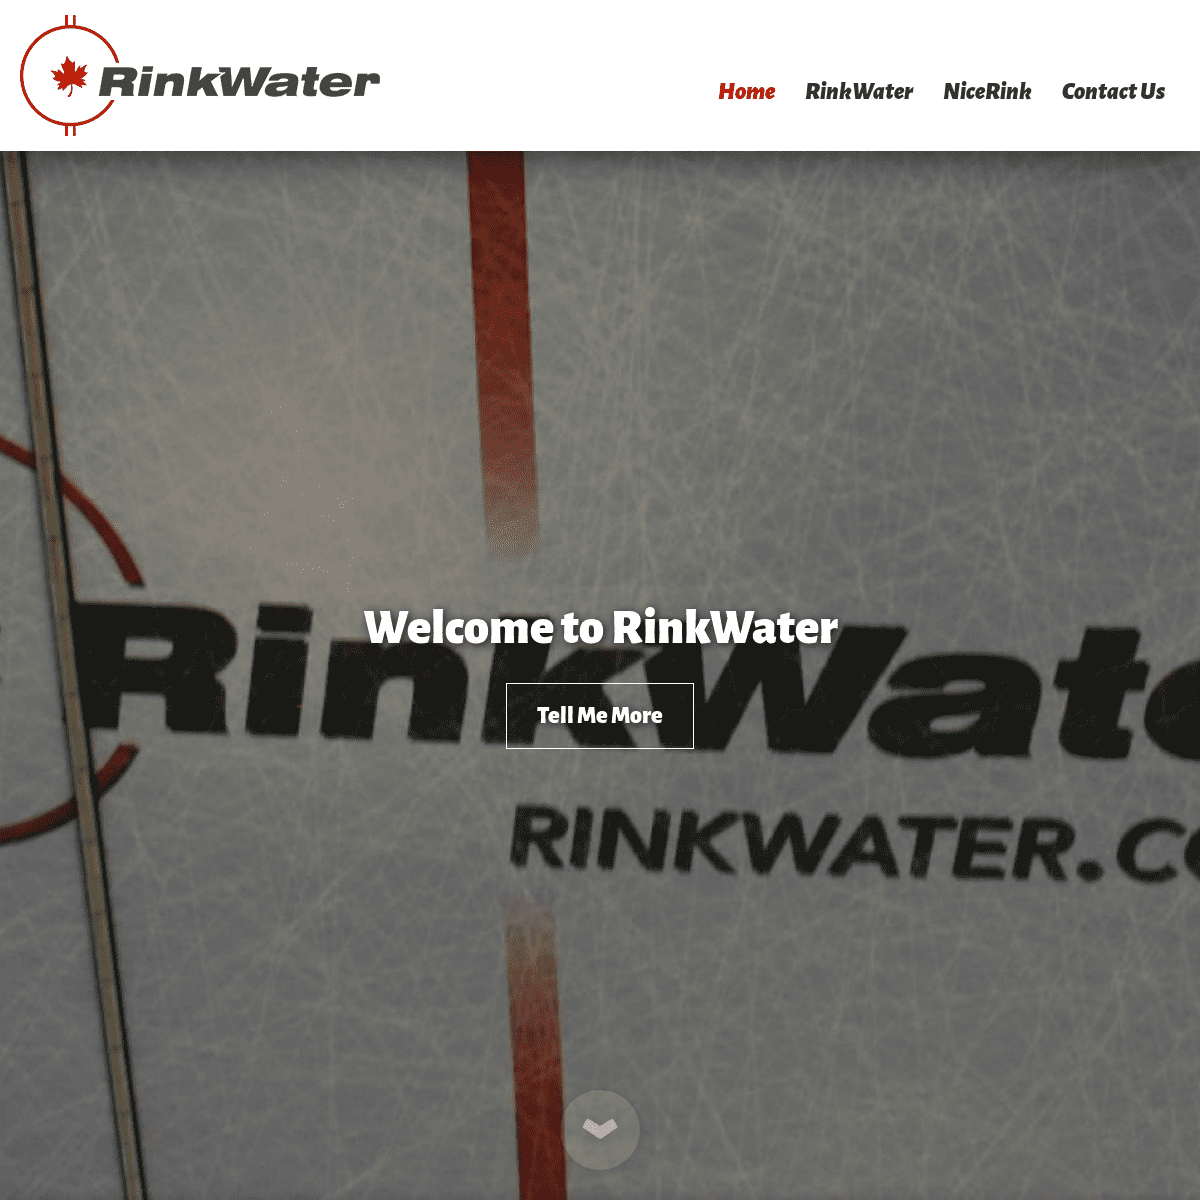 A complete backup of rinkwater.com